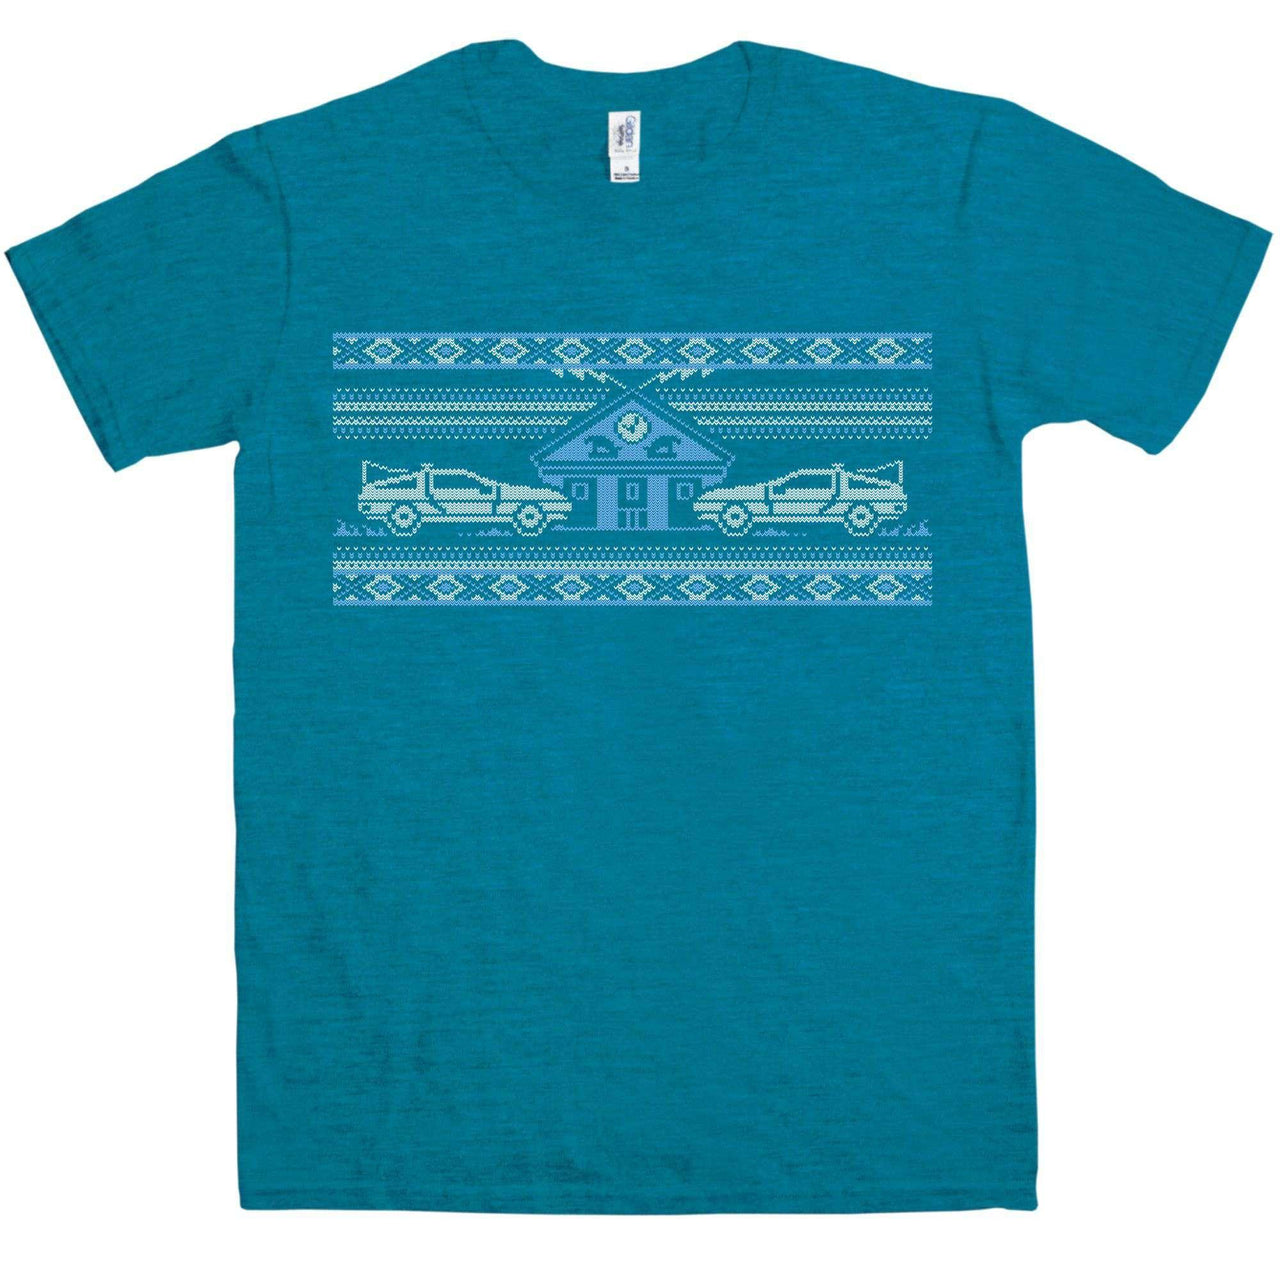 Knitted Jumper Style Bttf Graphic T-Shirt For Men 8Ball